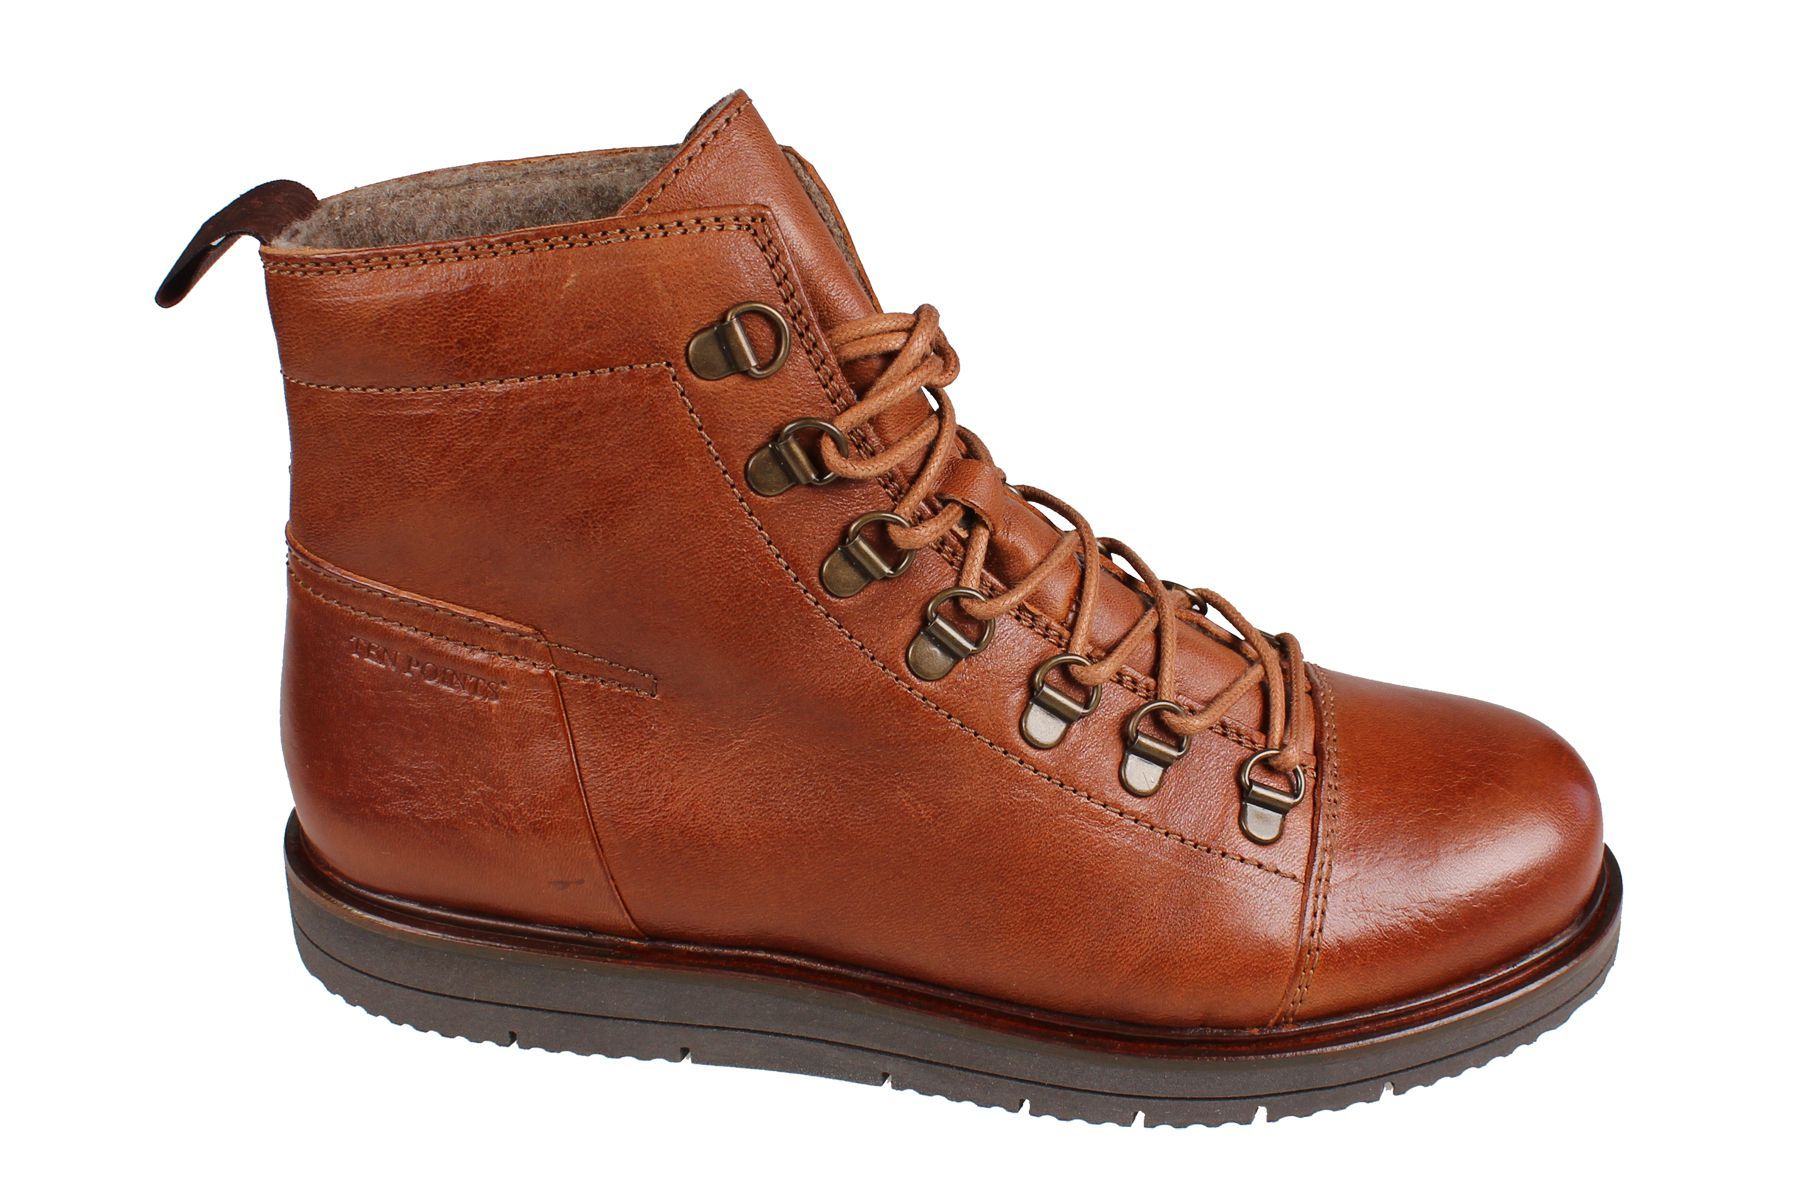 Ten Points Carina Lace-Up in Cognac